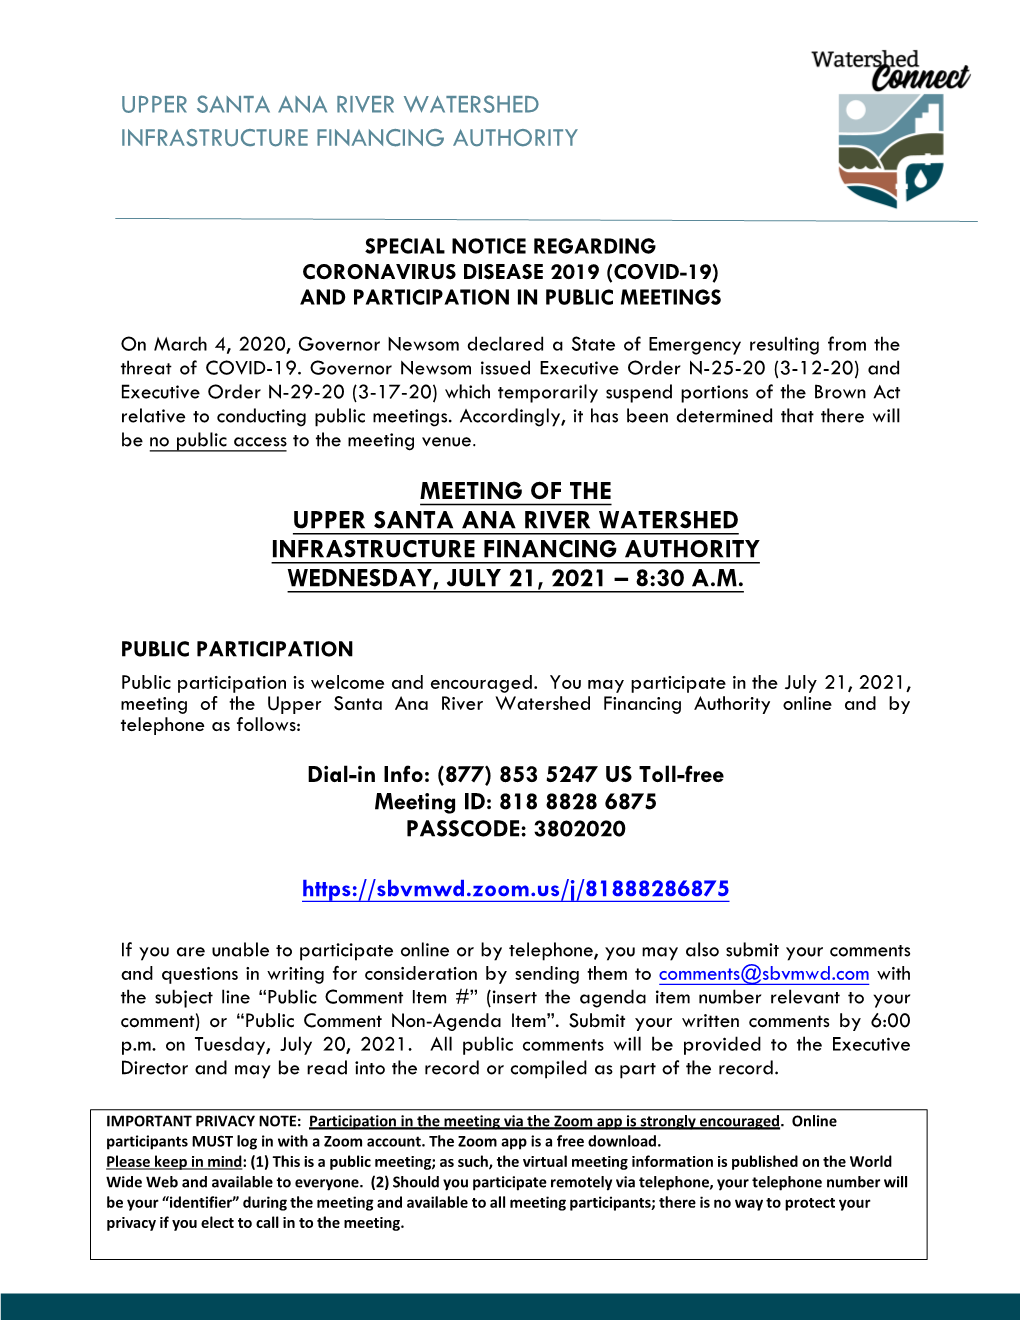 Upper Santa Ana River Watershed Infrastructure Financing Authority